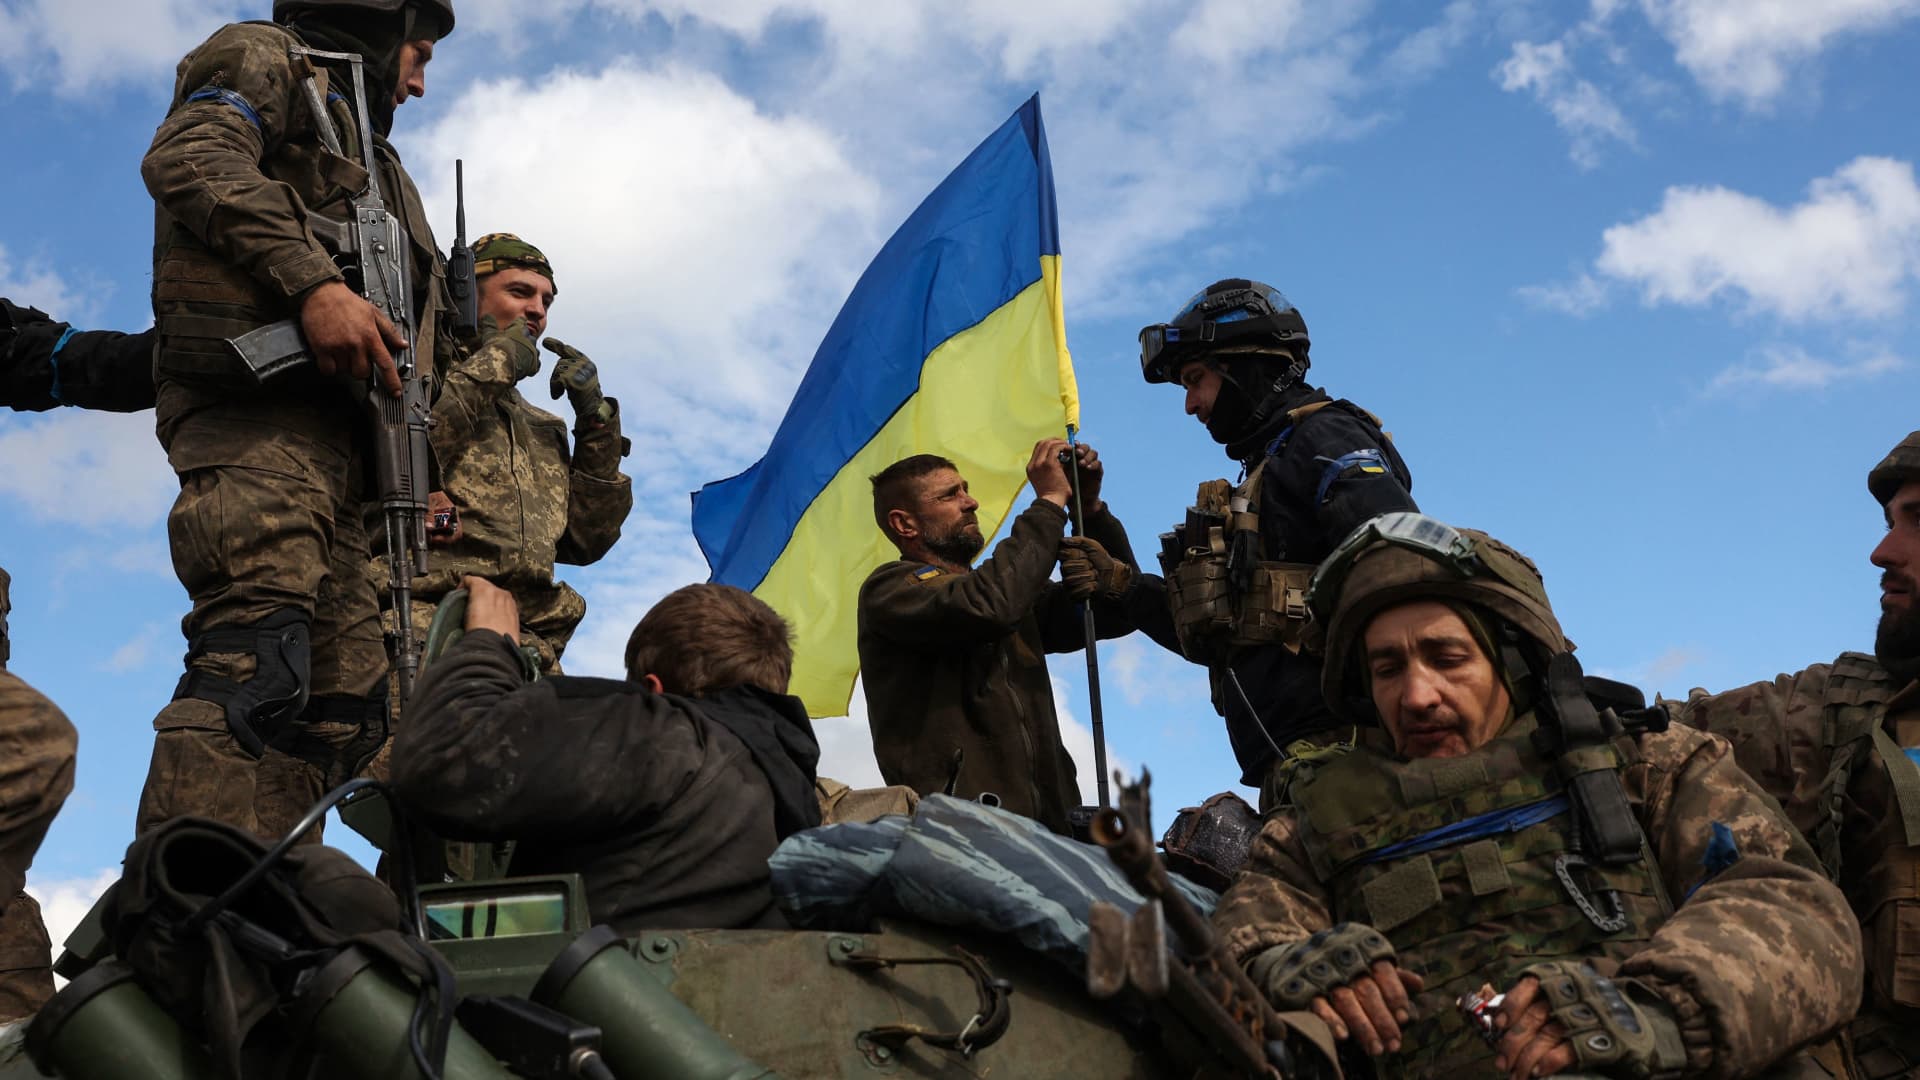 Ukrainian soldiers adjust their national flag atop a personnel armored carrier on a road near Lyman, in the Donetsk region, on Oct. 4, 2022.